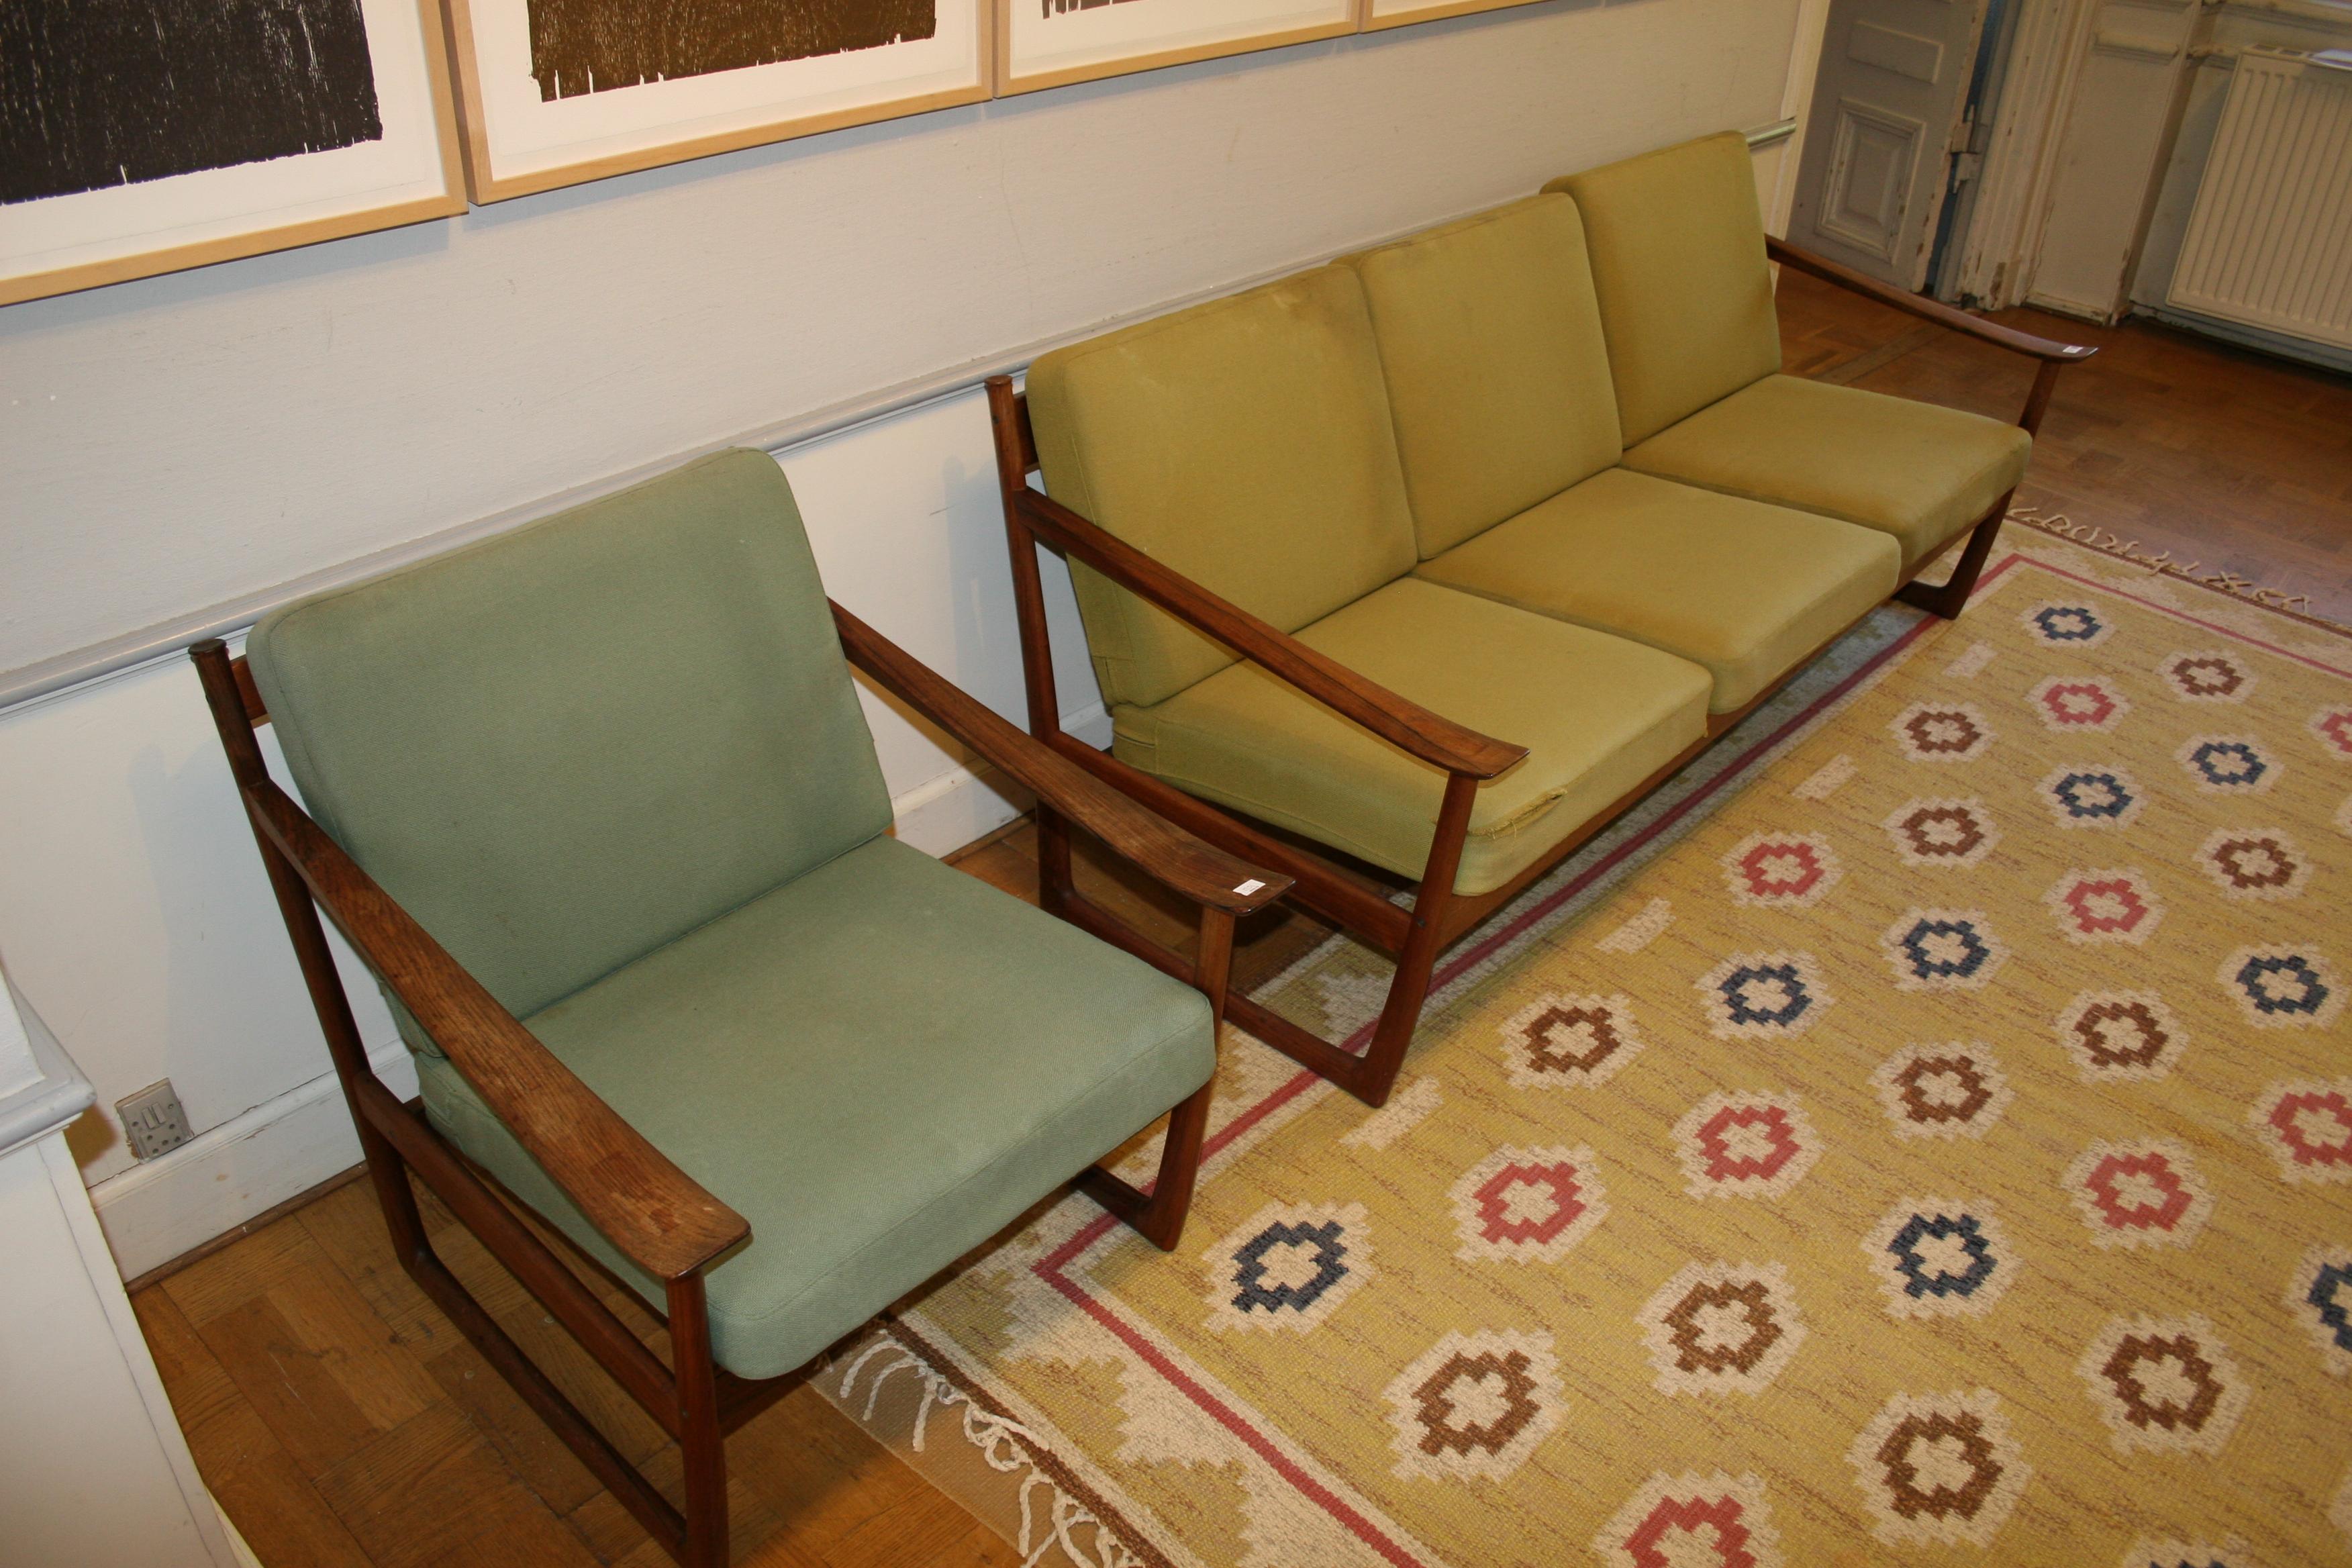 Freestanding three seater sofa and matching easy chair of rosewood. Loose cushions in seat and back upholstered with two different shades of green wool. Model 130. Designed 1961. These examples manufactured 1960s by France & Søn, with maker's metal